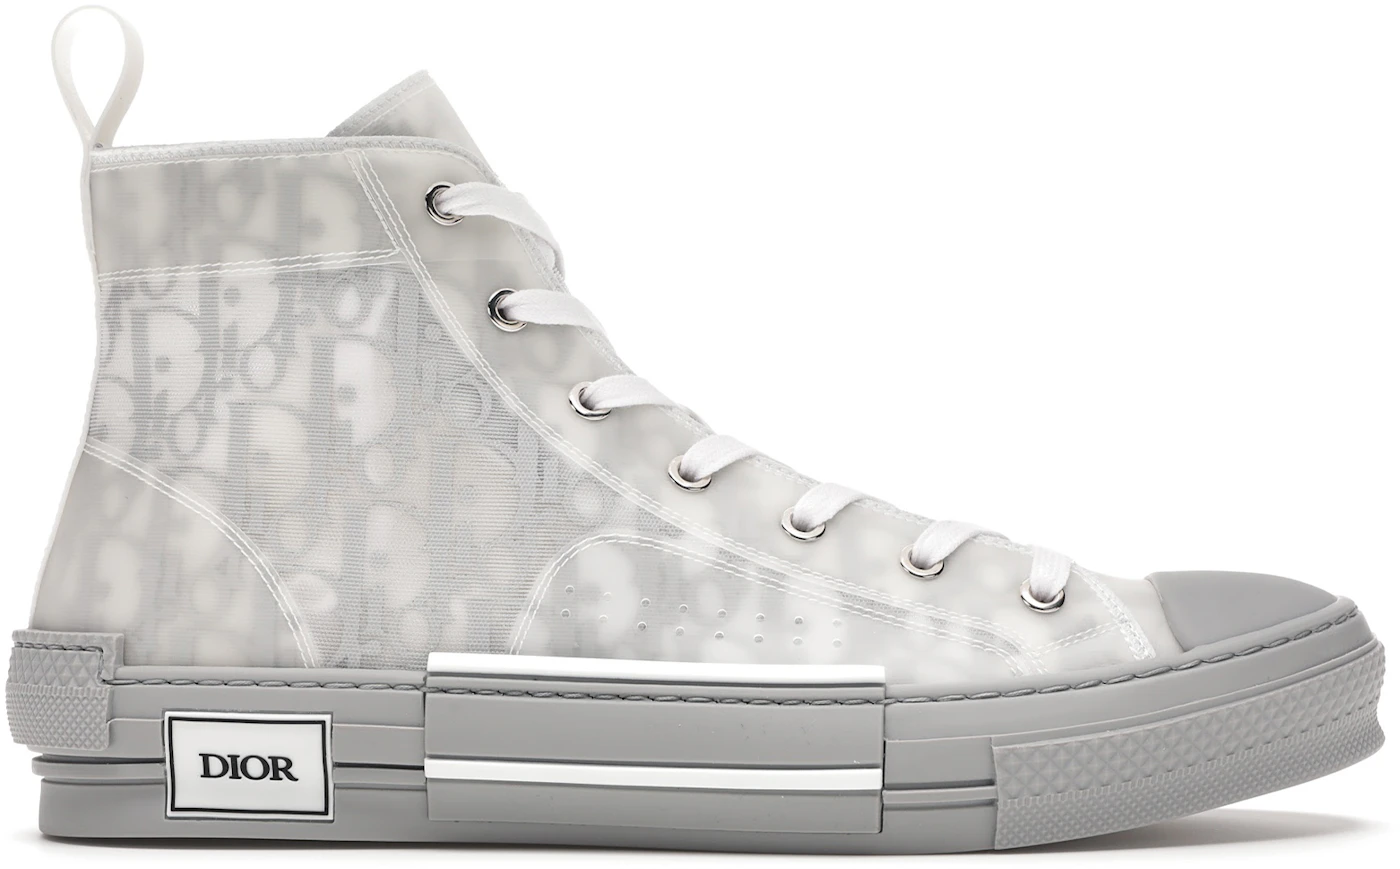 the $1000 converse style sneaker regret: dior b23 high-top sneaker